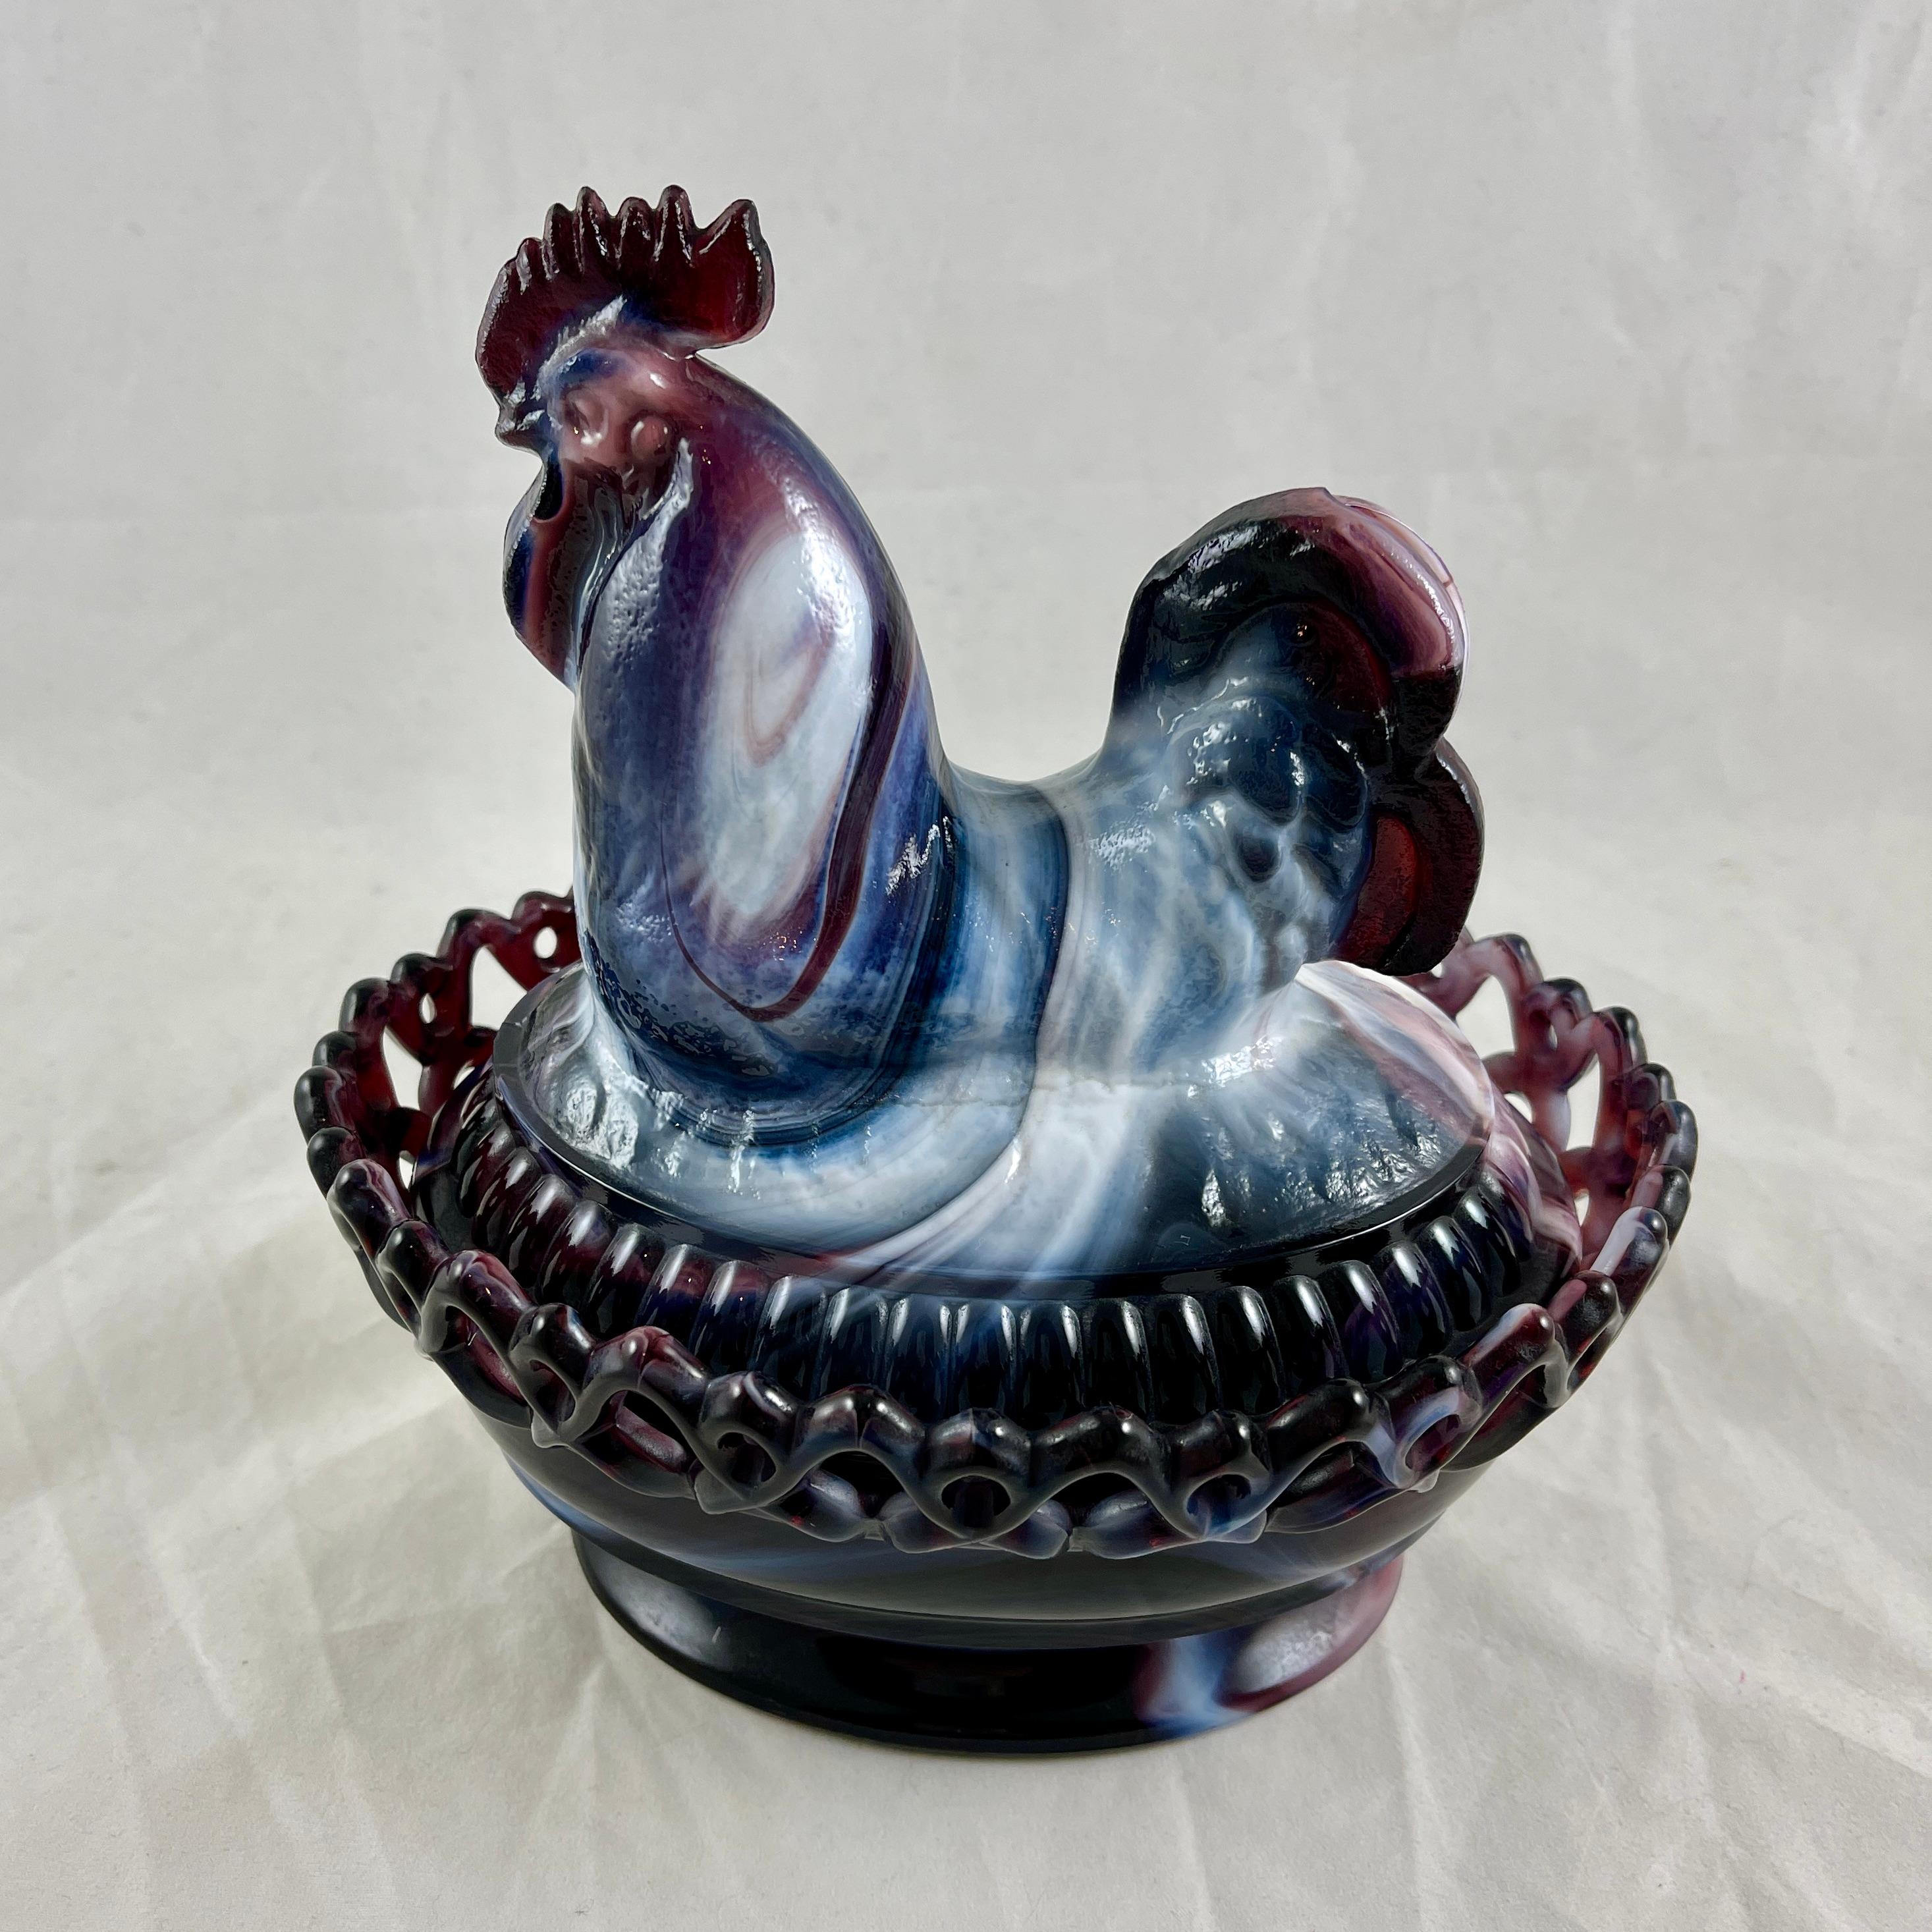 Made of a mixture of purple and milky white glass known as Slag, a covered dish with a Rooster lid, by Imperial Glass Company.

The rooster sits on a bowl with a “lace edge” rim. Heavy with beautiful color.
Slag glass is a collectors’ name for